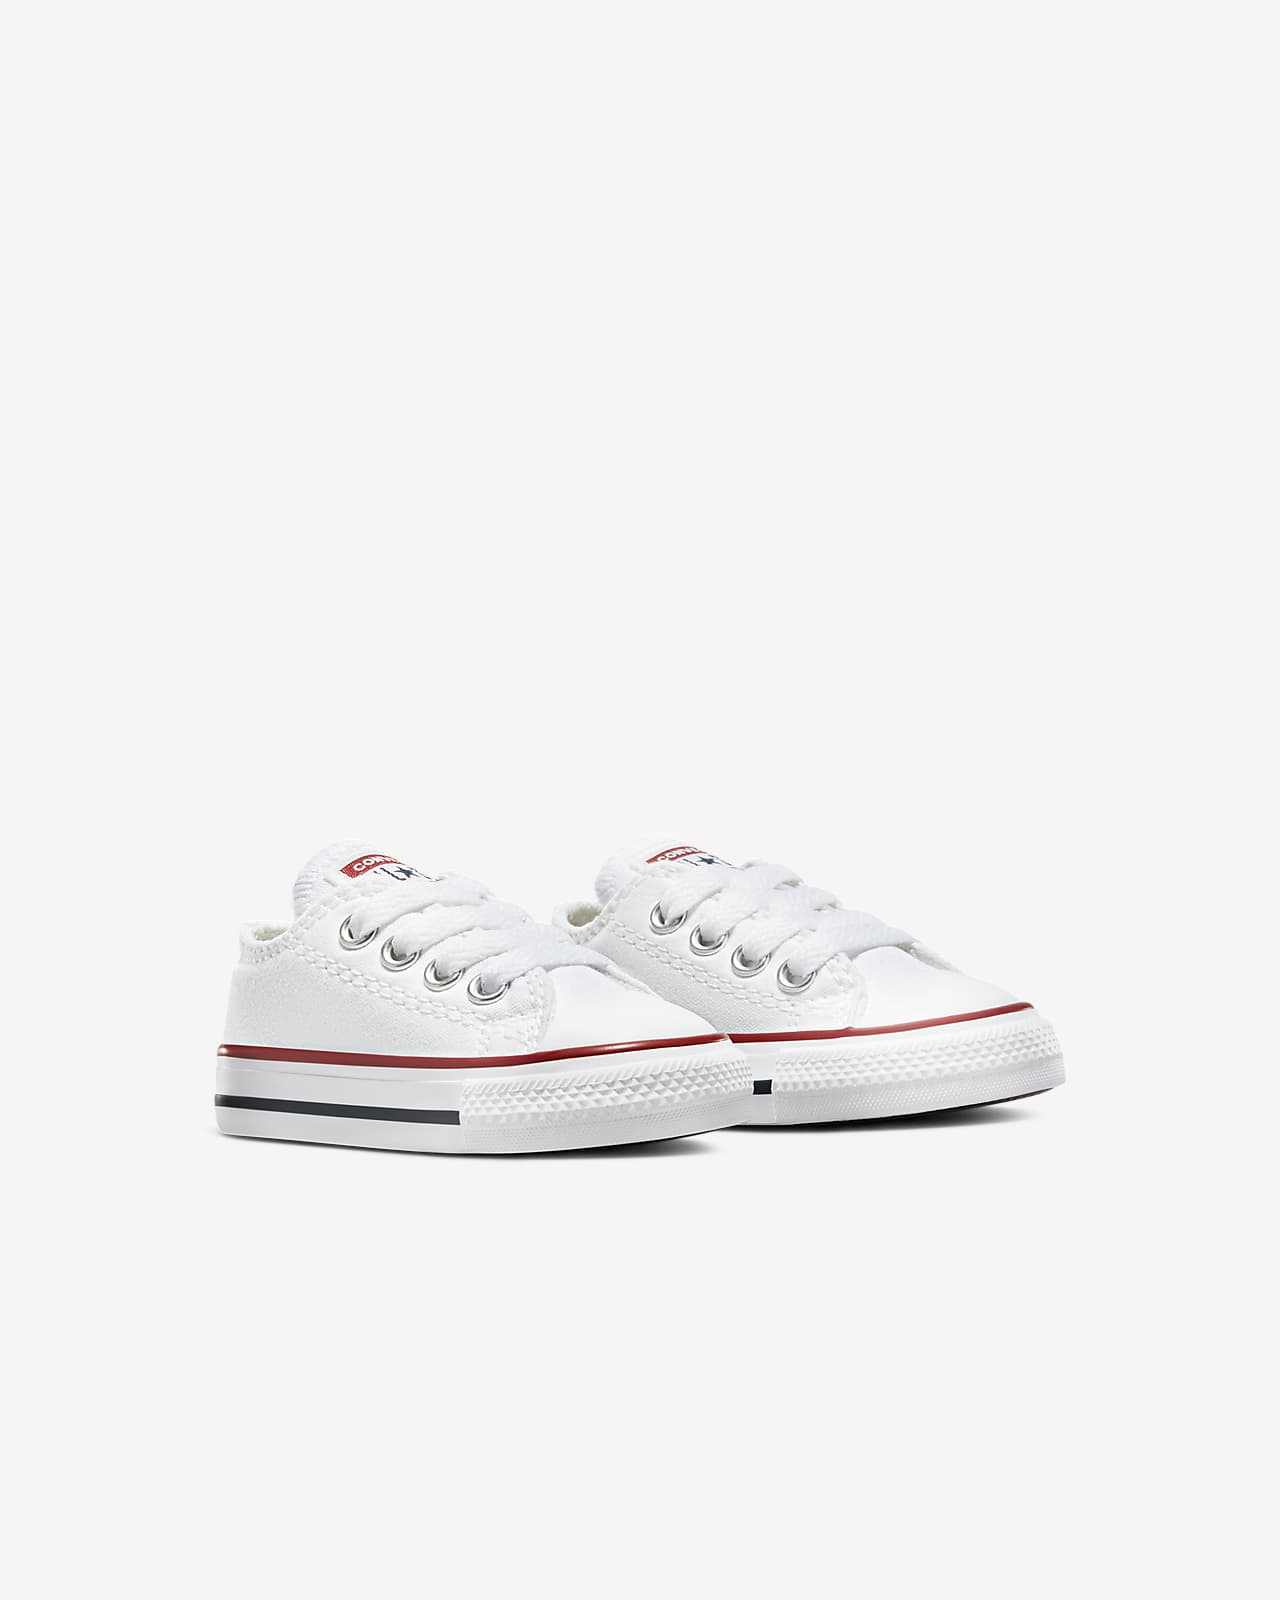 champion parallel stribe Converse Chuck Taylor All Star Low Top (2c-10c) Infant/Toddler Shoe.  Nike.com